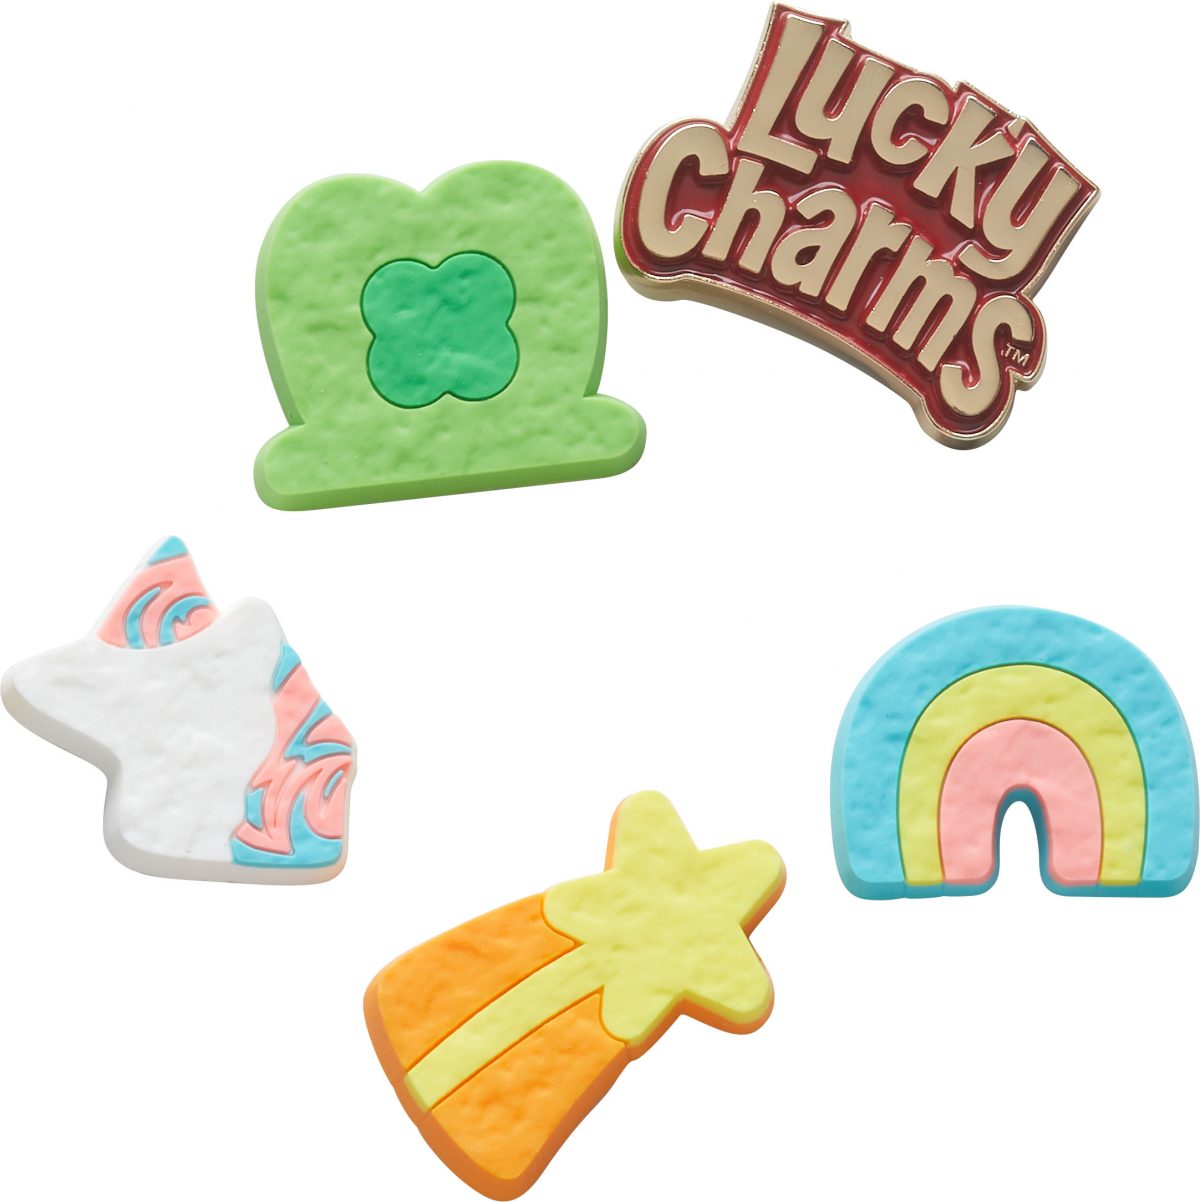 crocs accessories charms